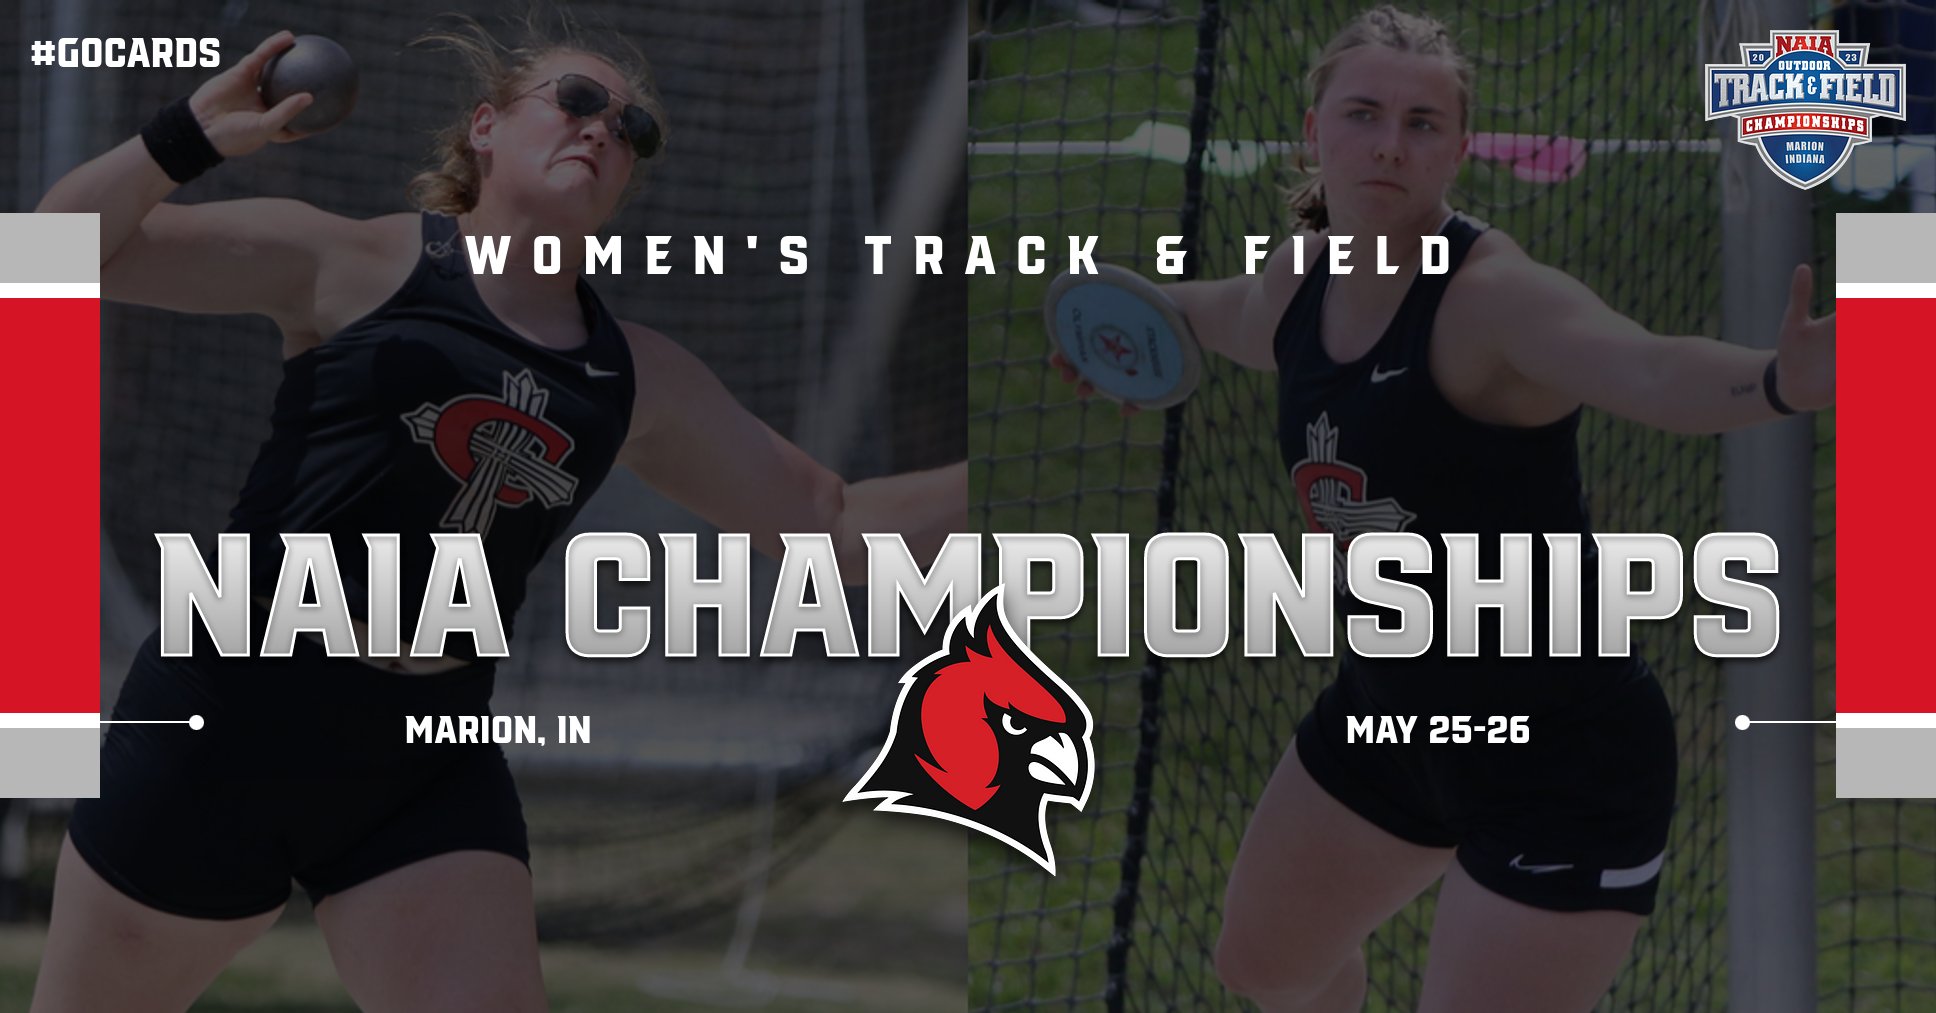 NAIA PREVIEW: Korte and Hirt set to compete at the NAIA Championships